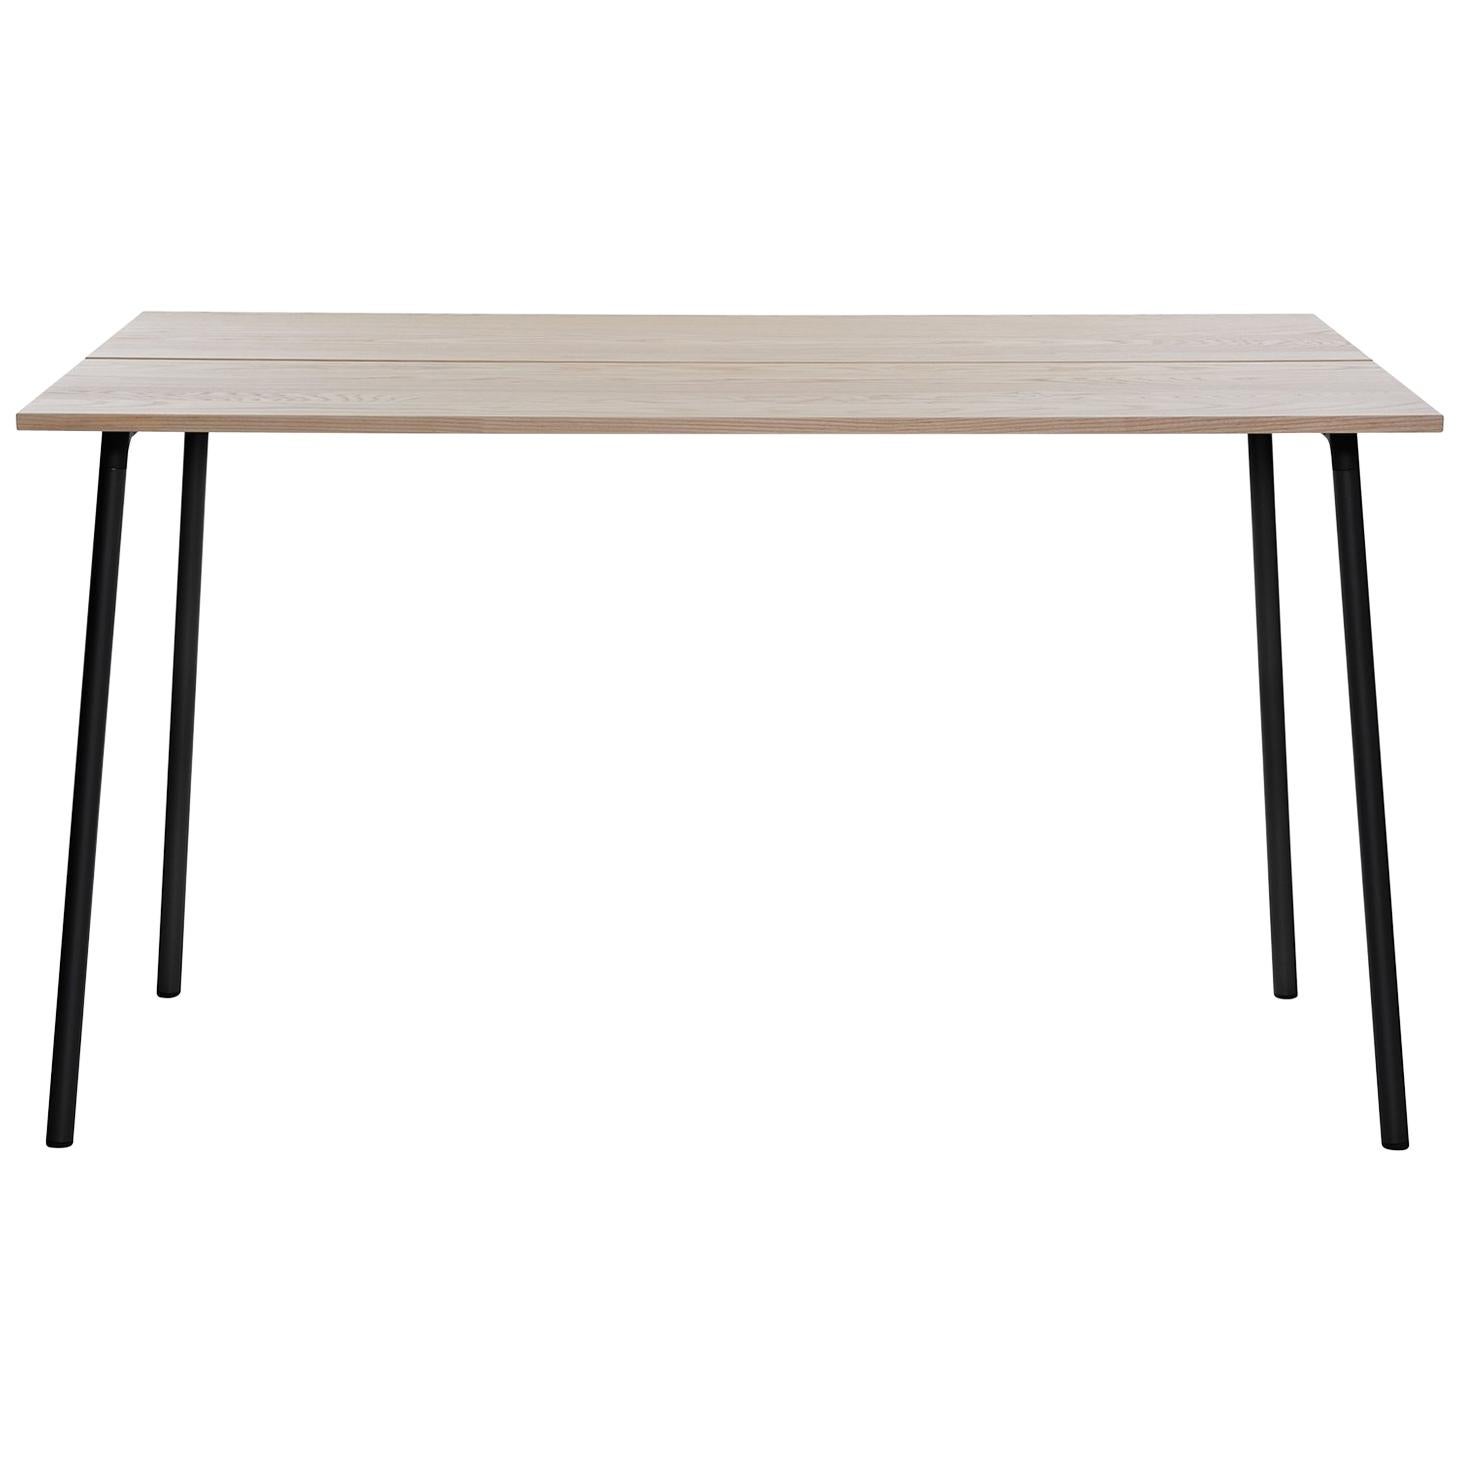 Emeco Run Large High Table in Black Powder-Coat & Ash by Sam Hecht + Kim Colin For Sale